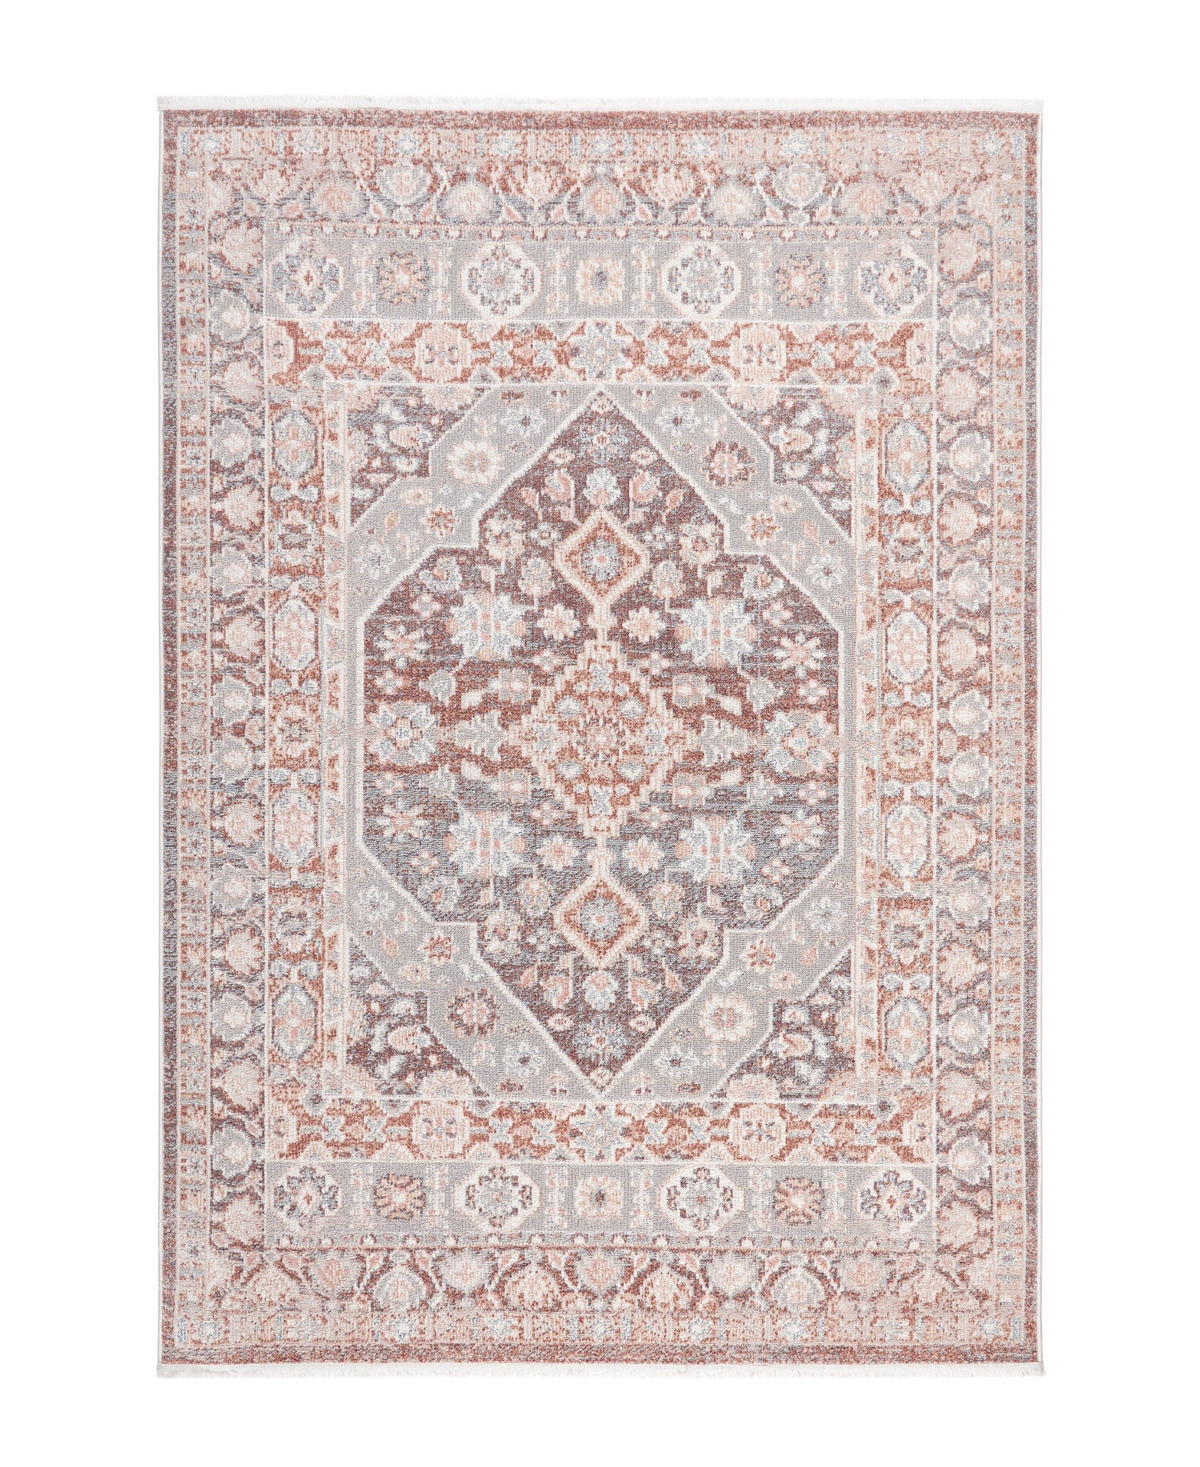 Town & Country Living Everyday Rein Everwash 17 6'6" X 9'6" Area Rug In Brown,gray